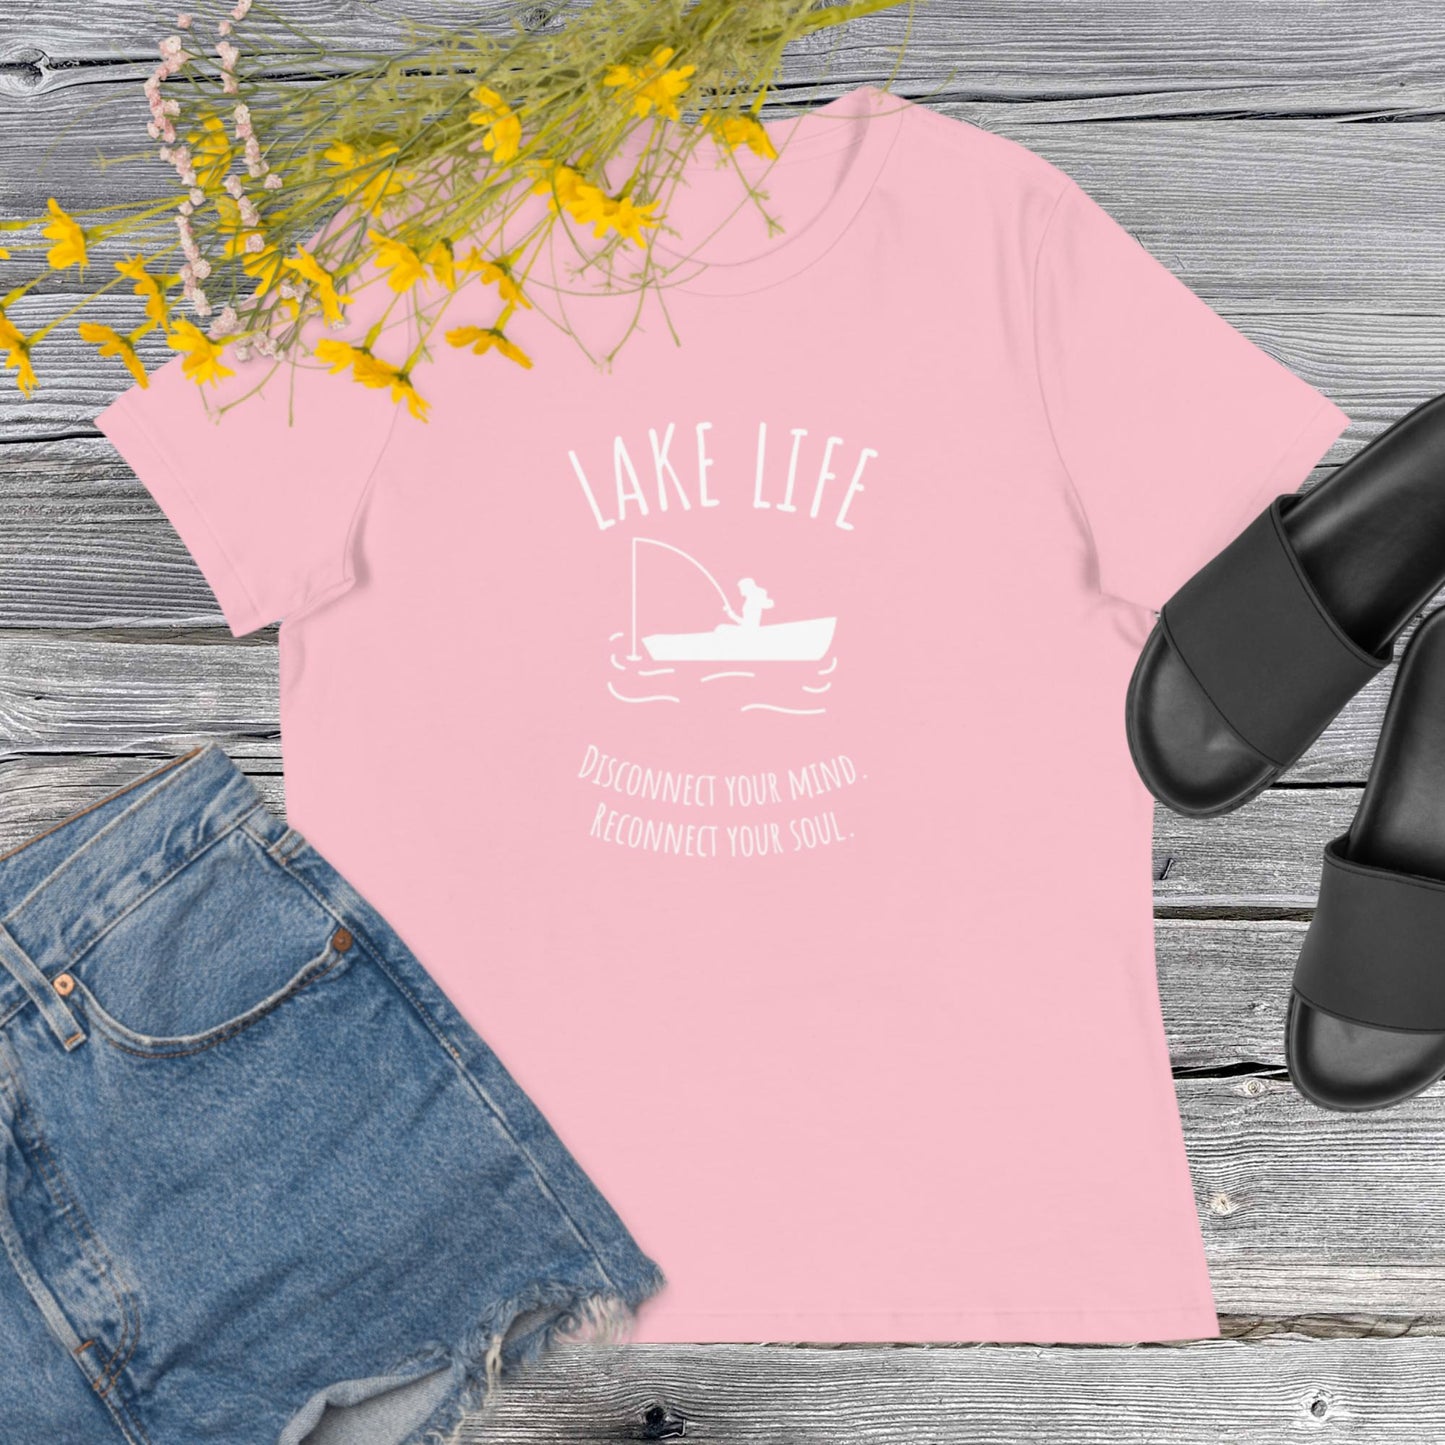 Lake Life - Disconnect your mind, reconnect your soul - Womens tee (white design)